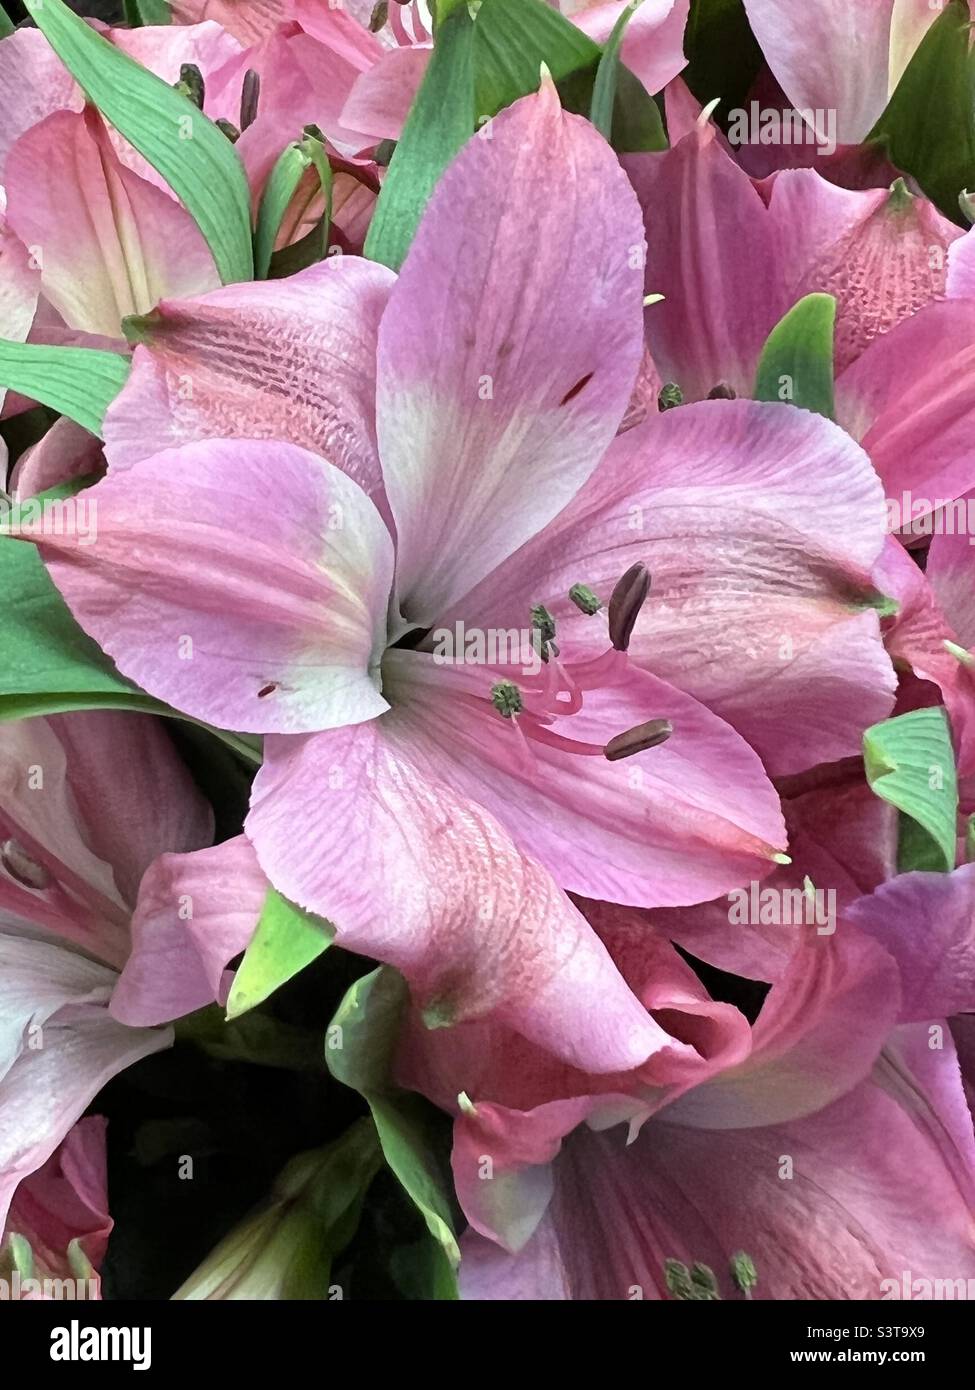 Pink day lilies Stock Photo